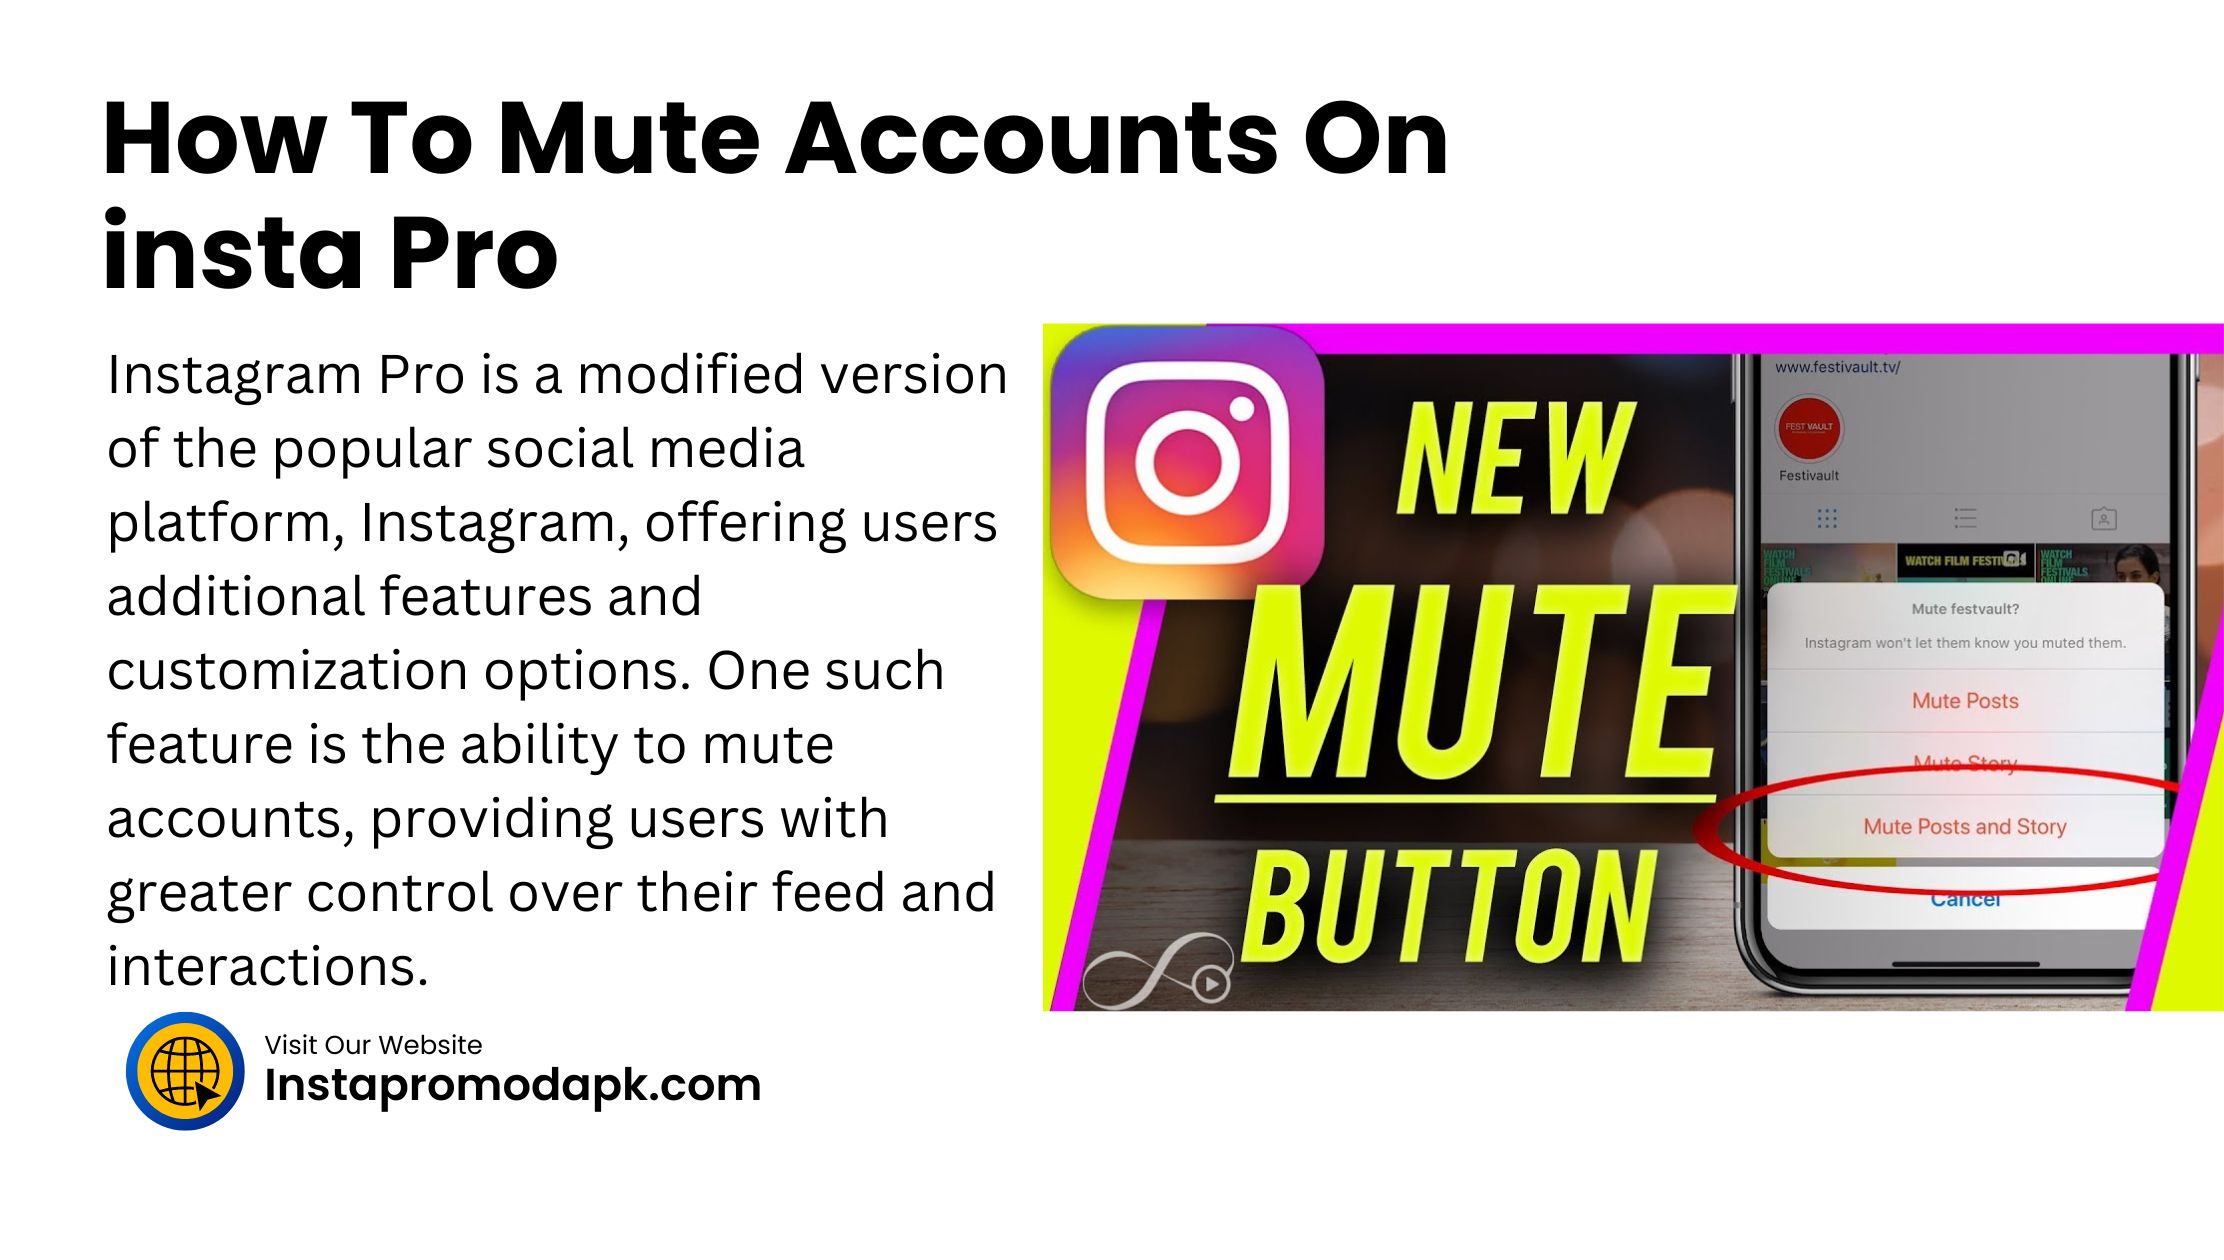 How To Mute Accounts On insta Pro